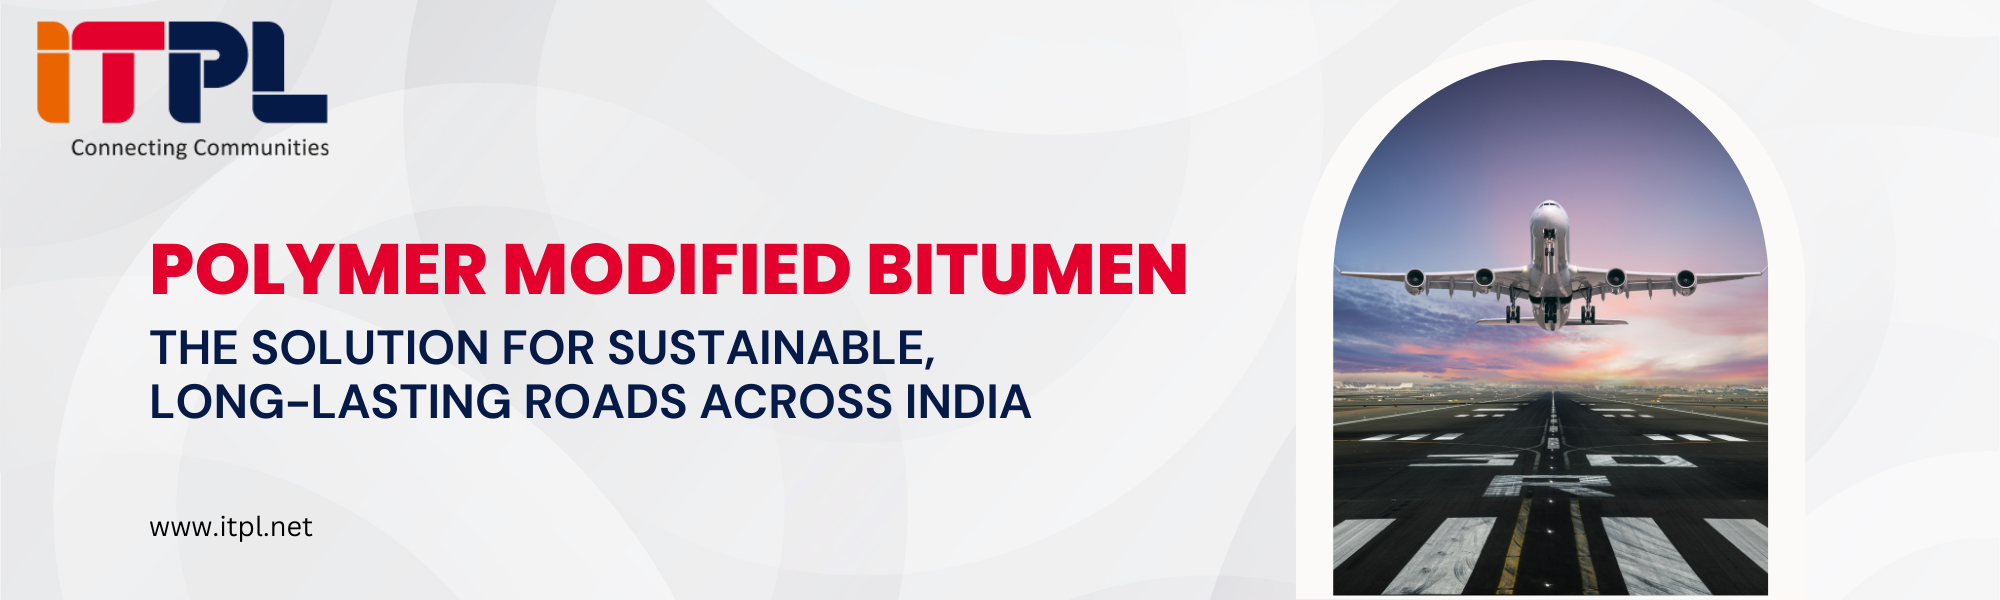 Polymer Modified Bitumen: The solution for sustainable, long-lasting roads across India